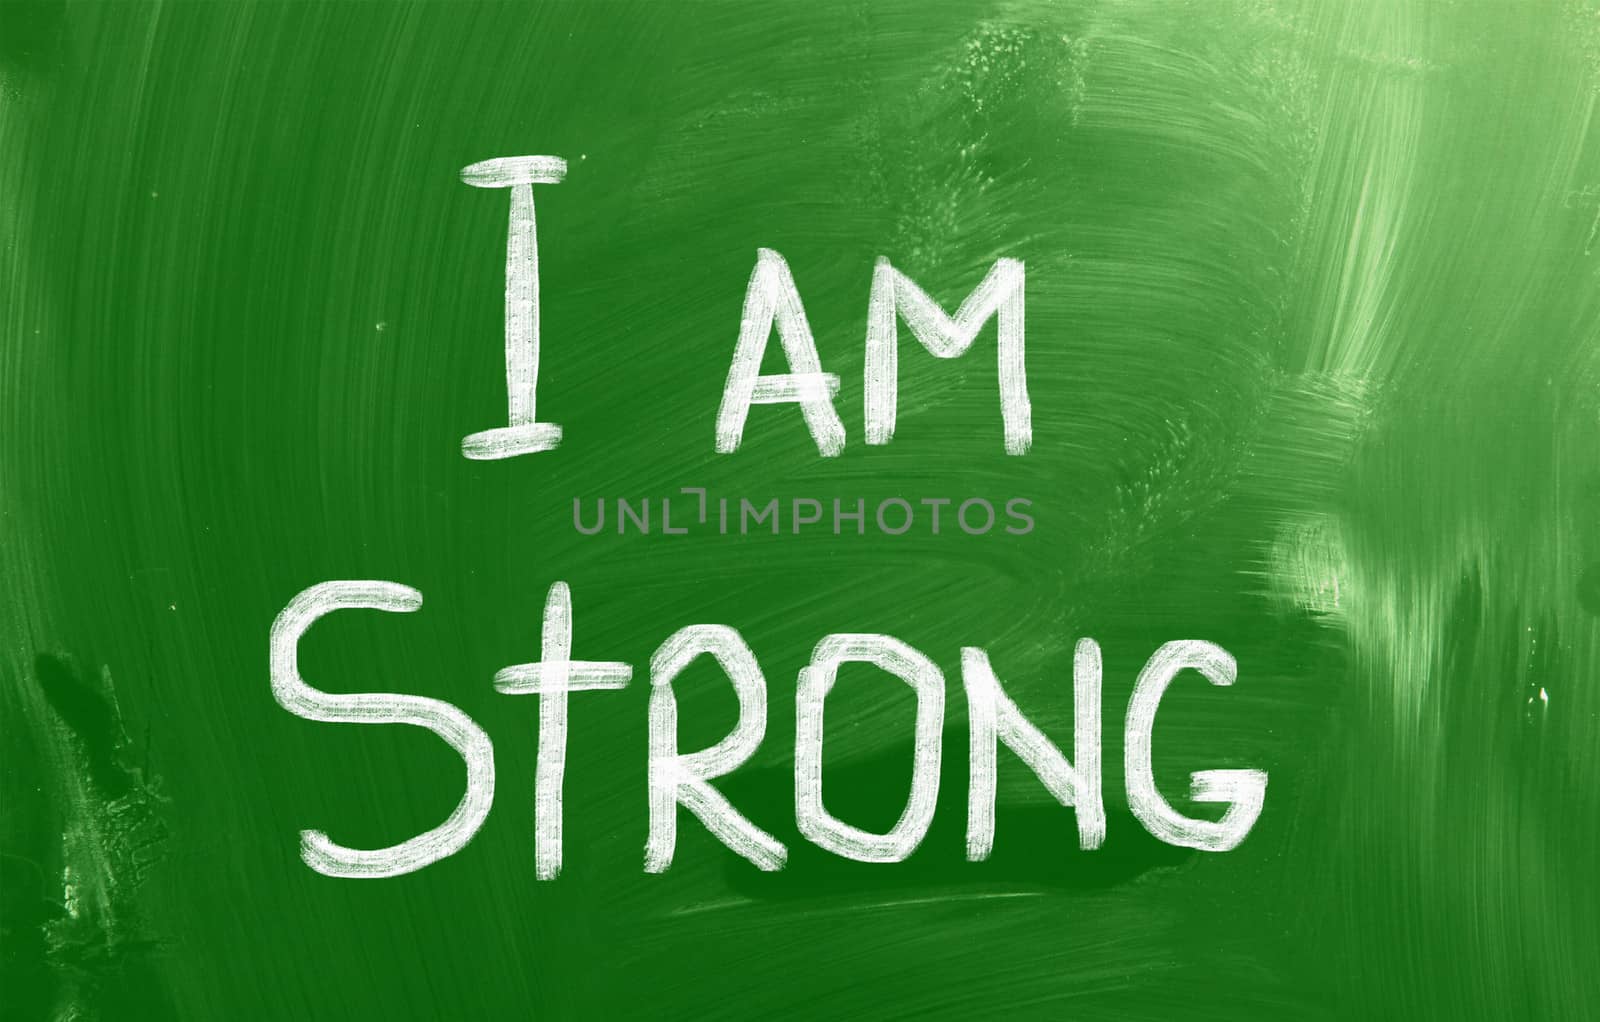 I Am Strong Concept